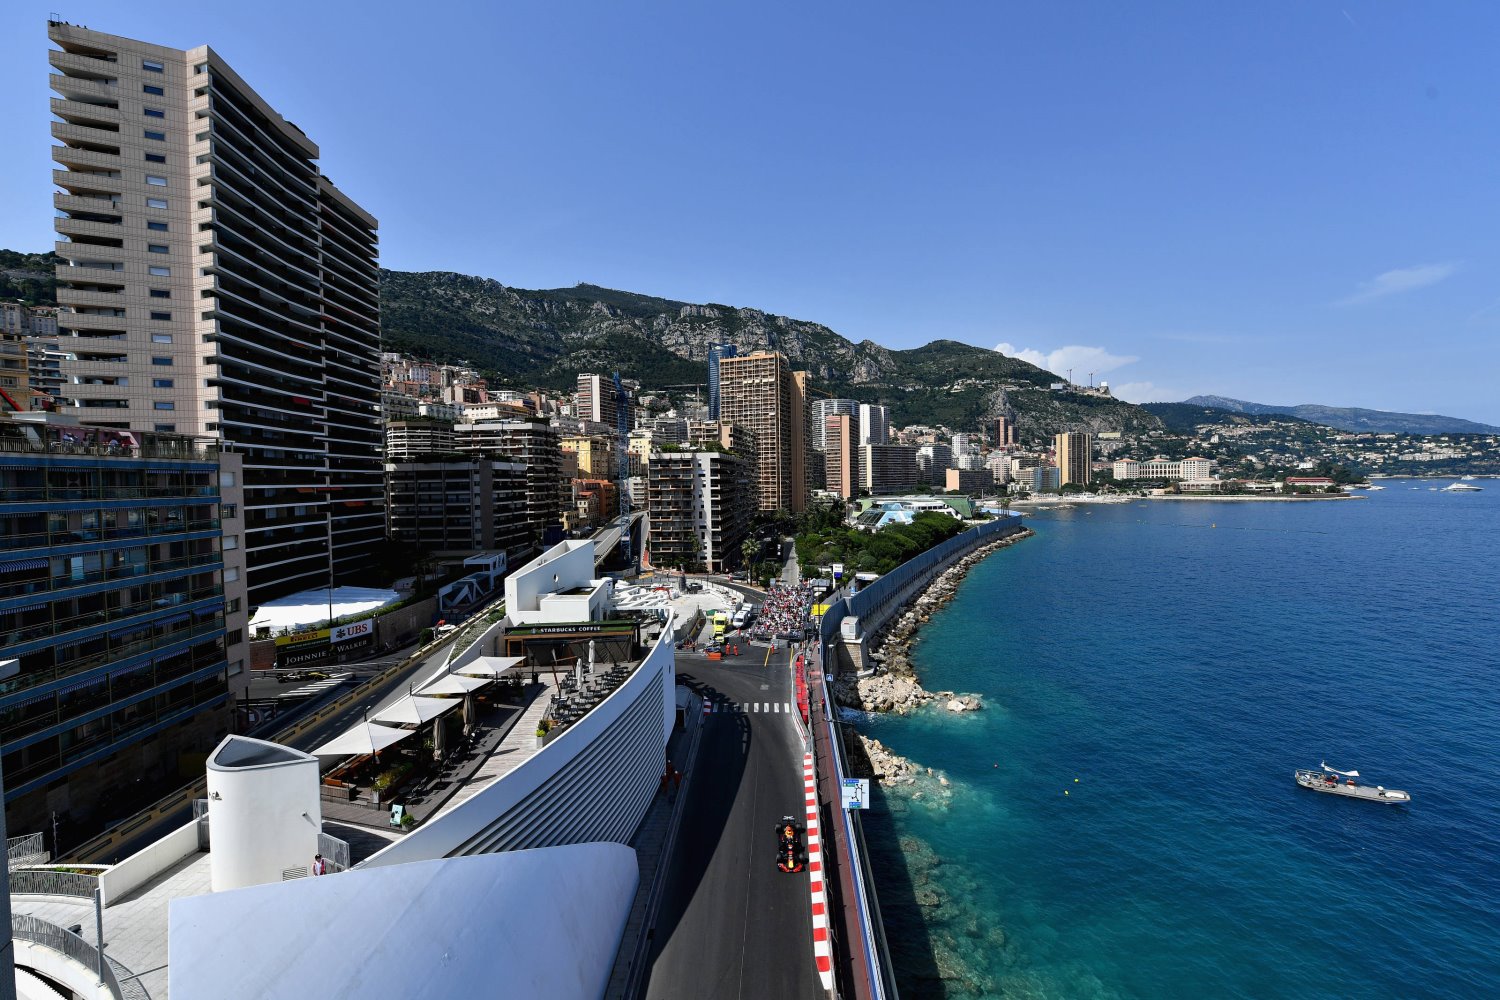 Monaco was never a race that featured a lot of passing